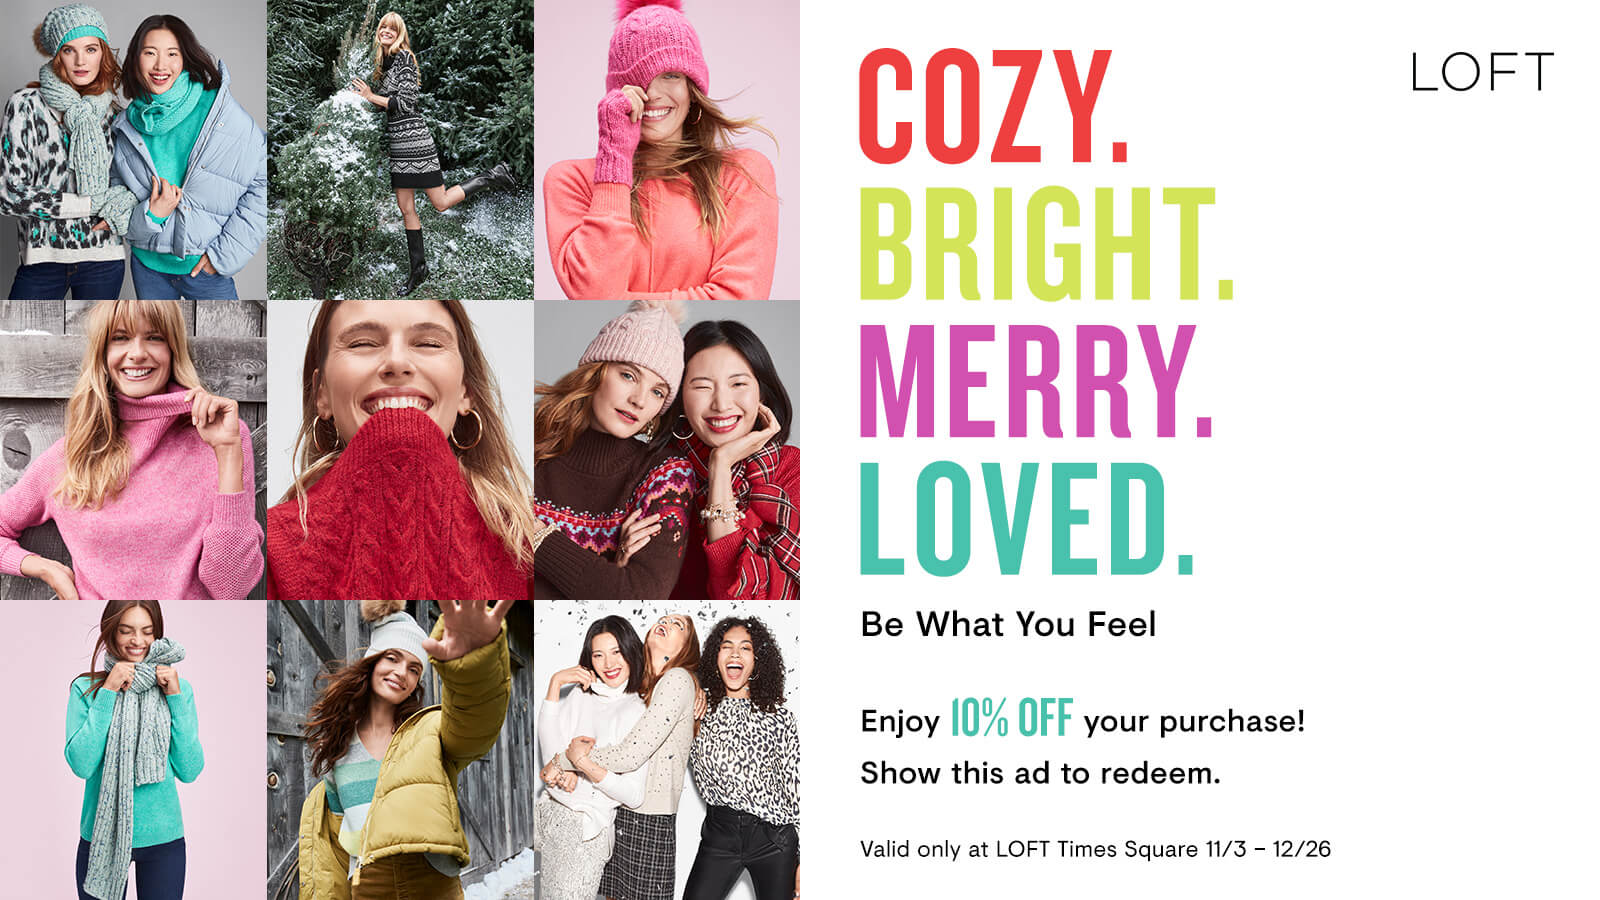 Cozy. Bright. Merry. Loved. Be What You Feel. Enjoy 10% off your purchase! Show this ad to redeem. Valid only at LOFT Times Square 11/3 - 12/26.